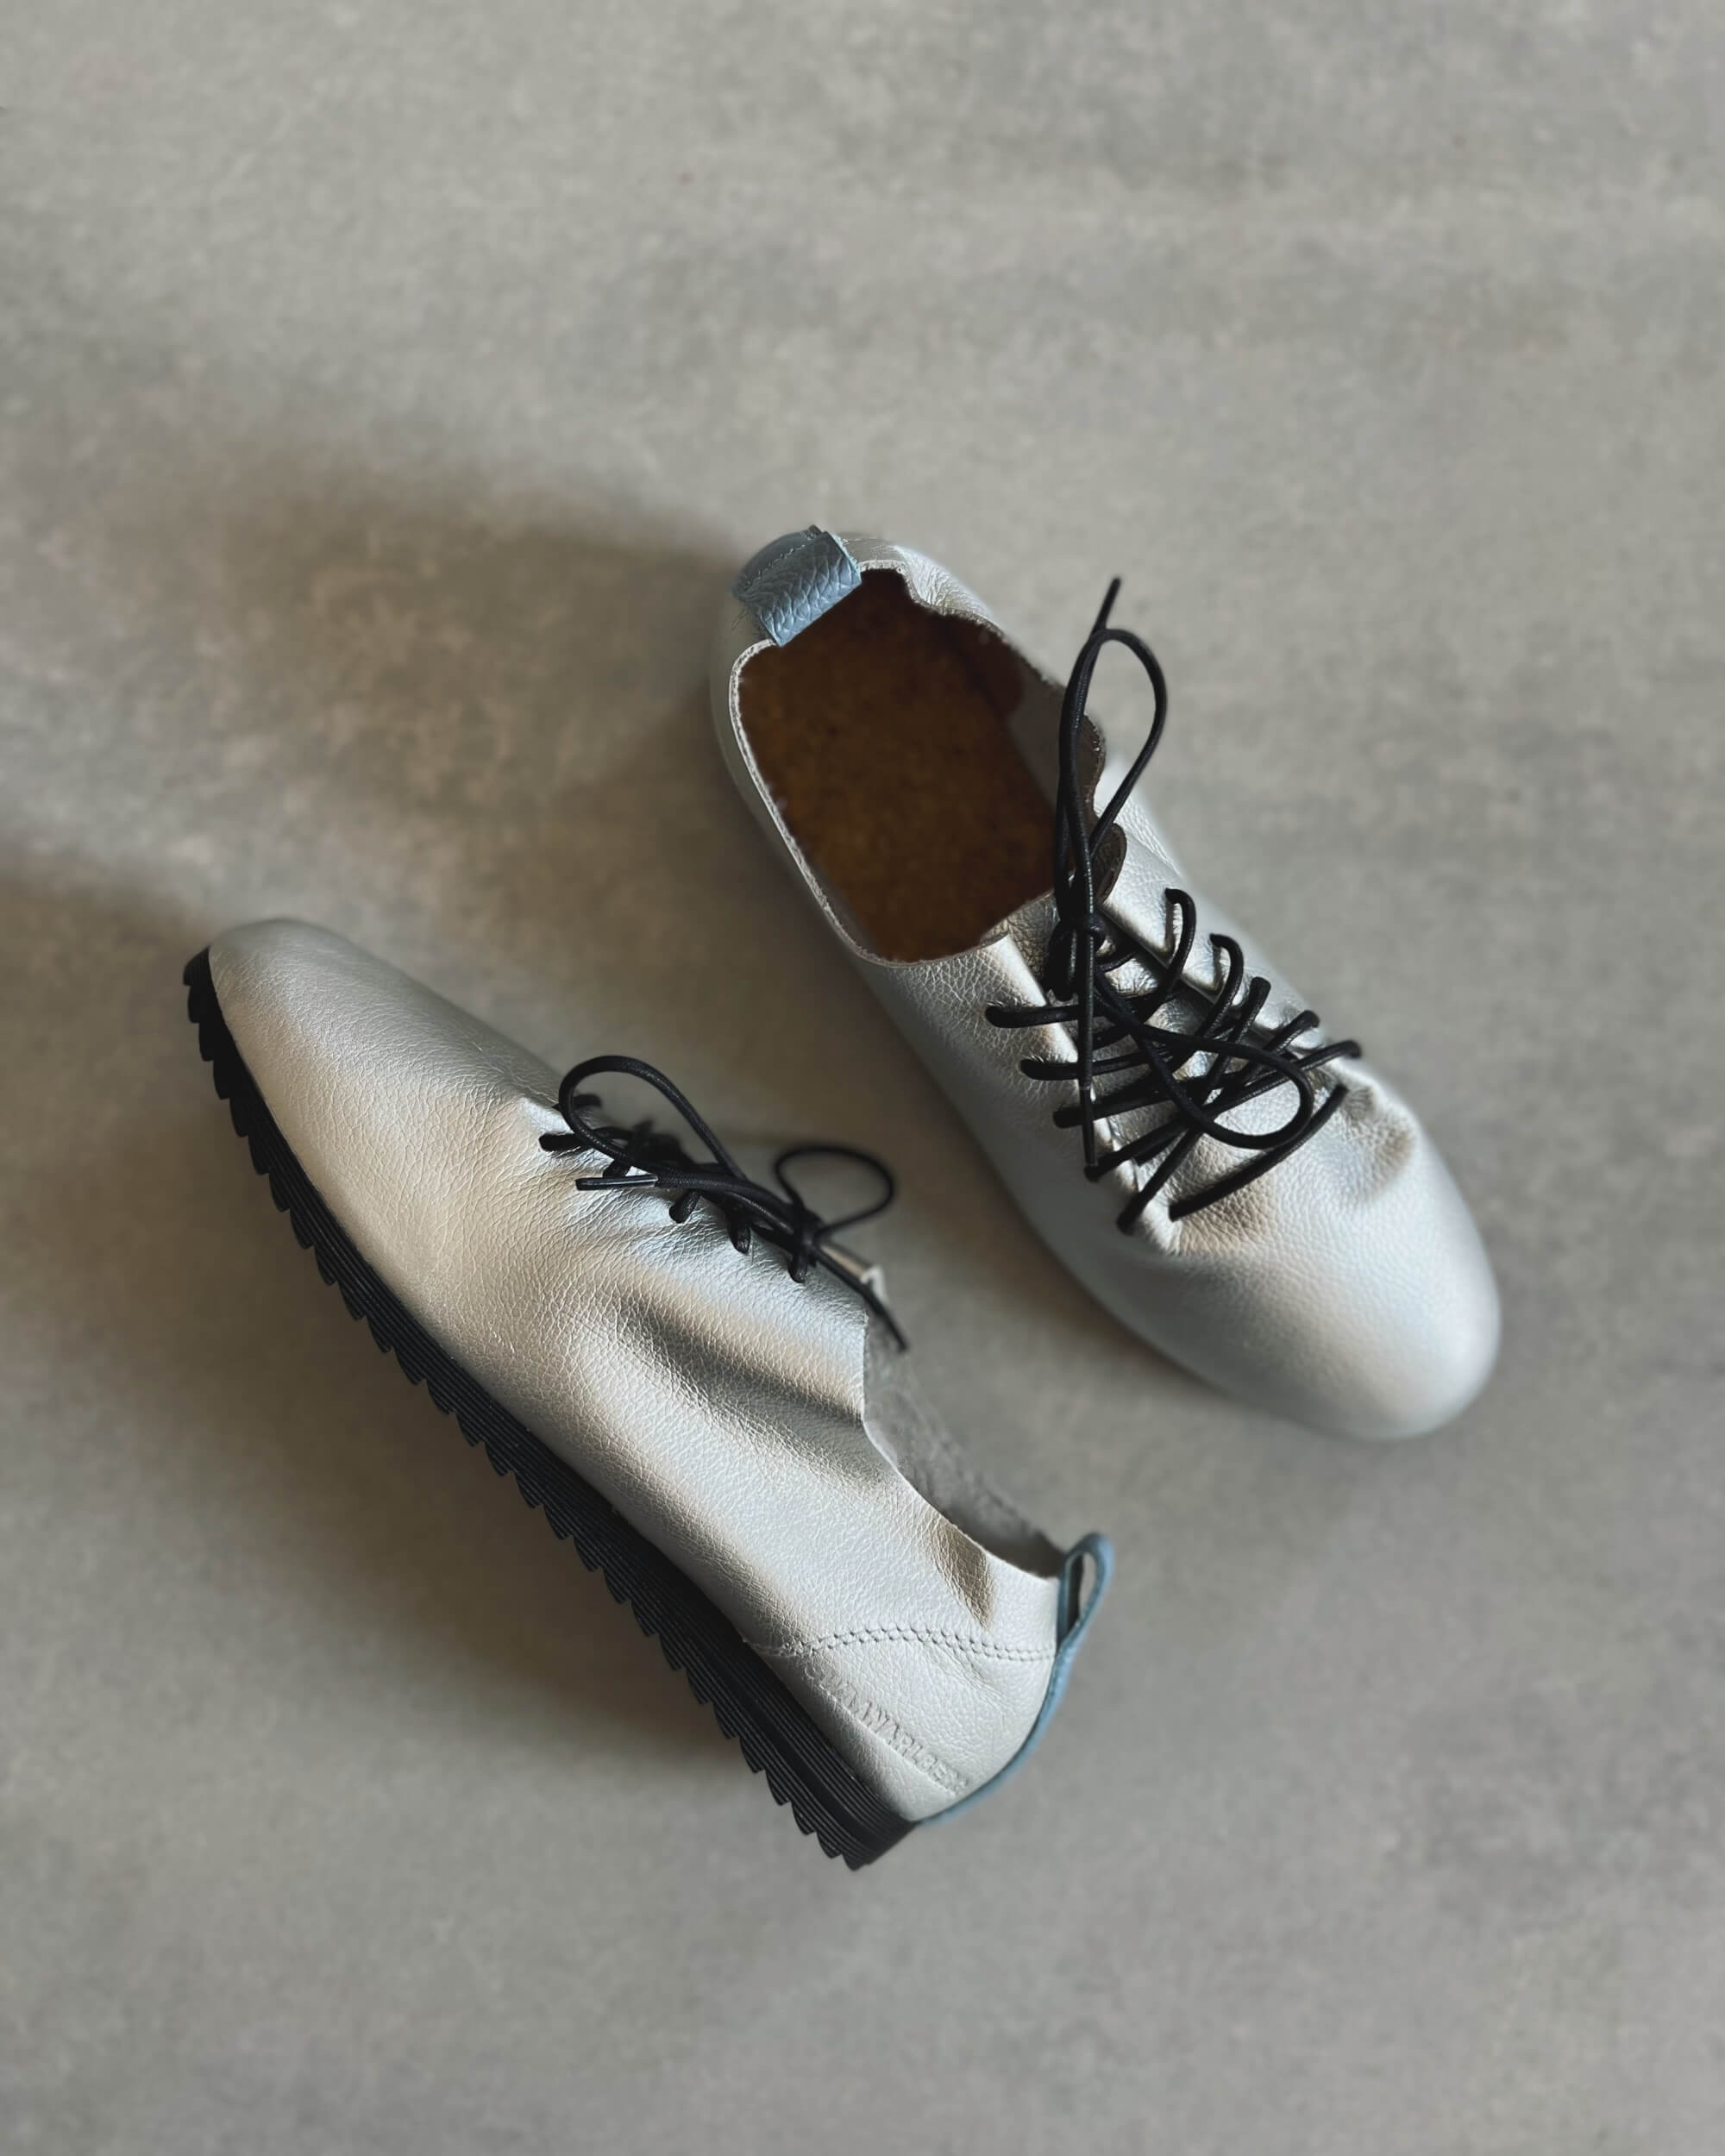 swaanarlberg : japanese leather shoes in silver